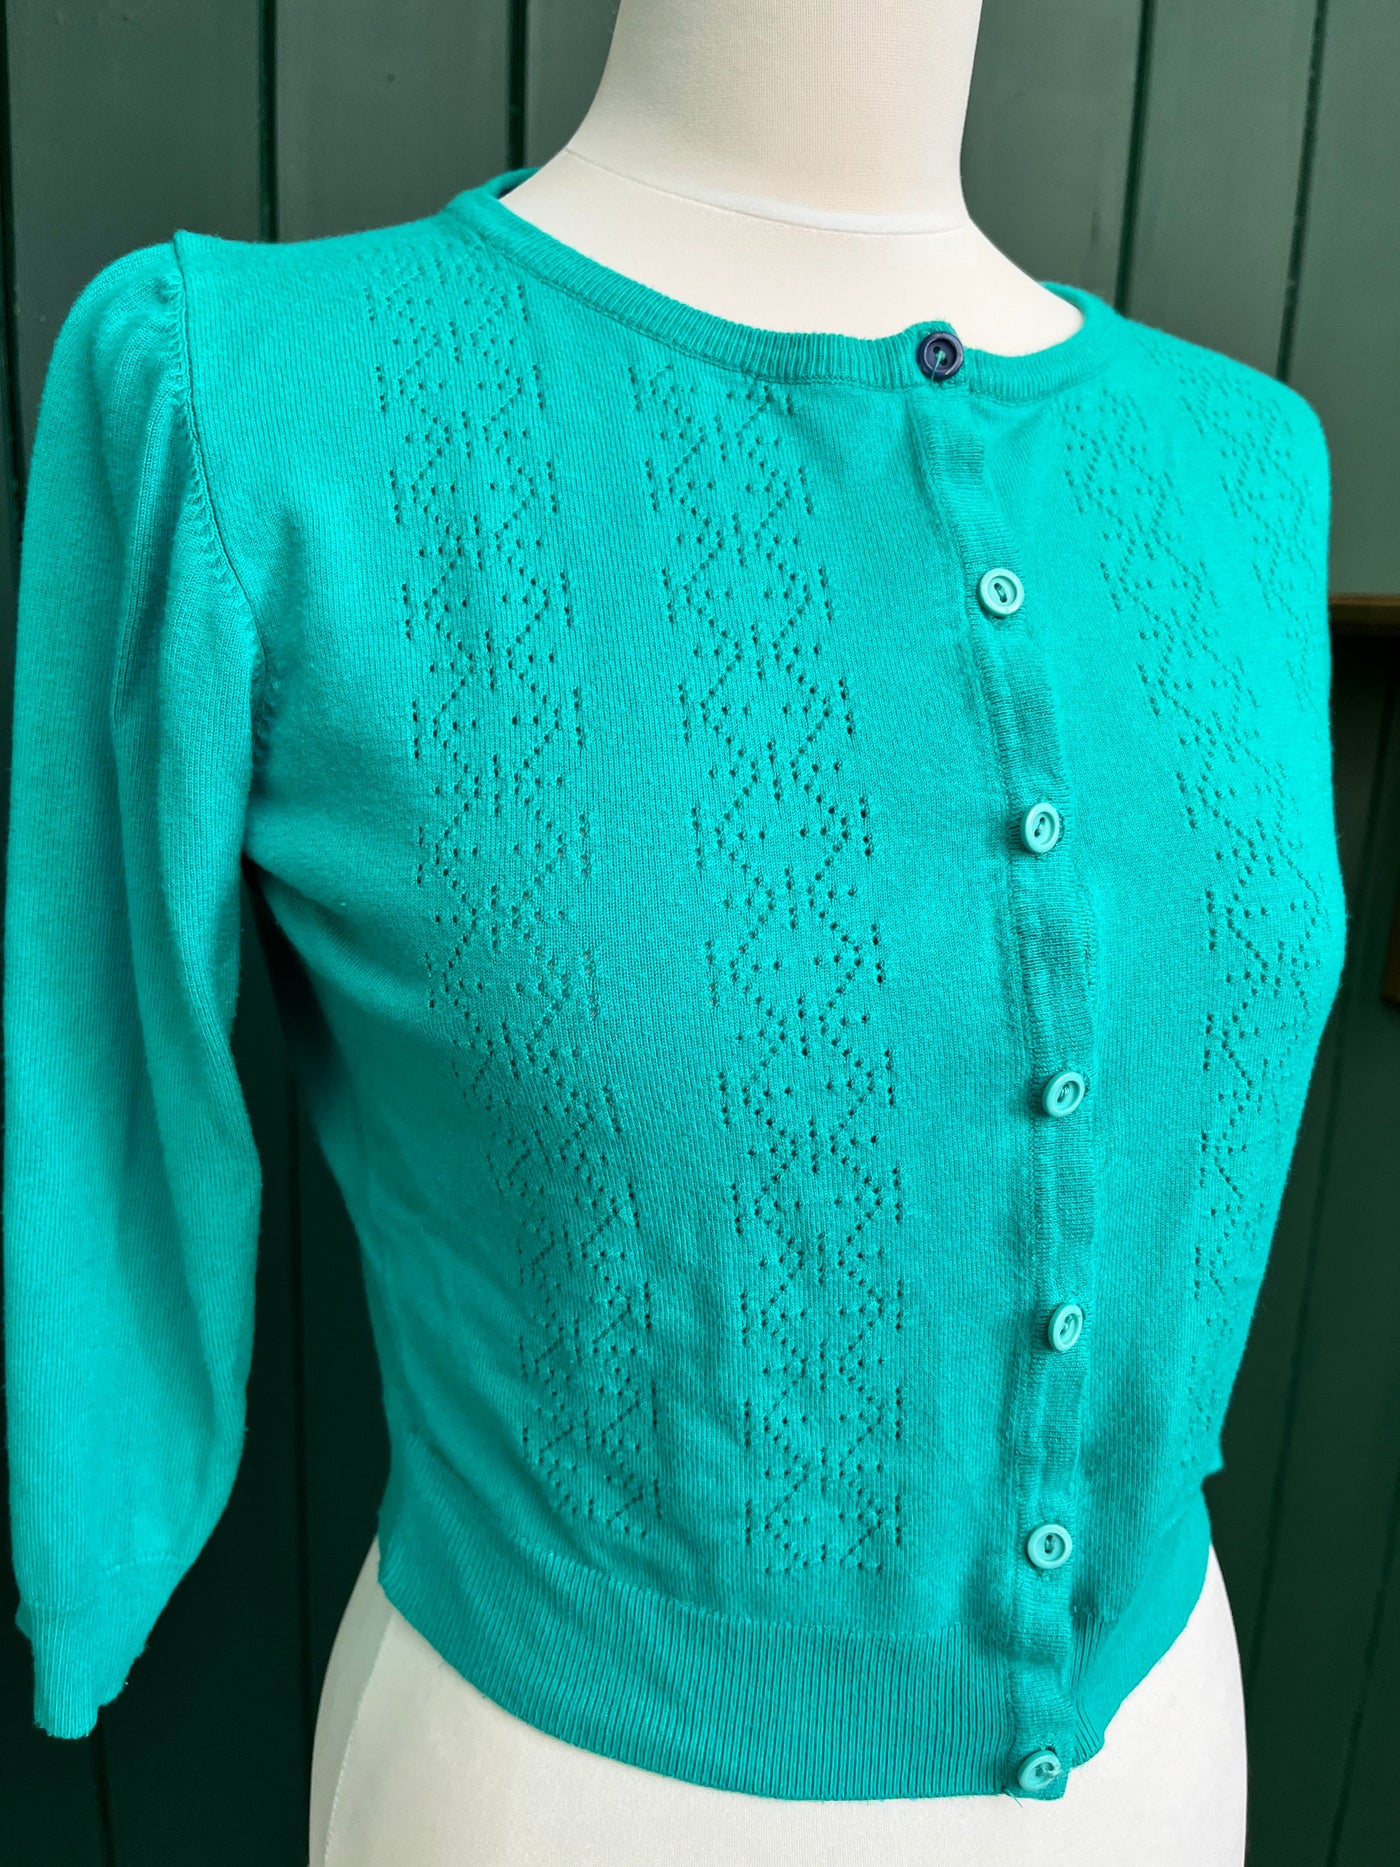 Re-Wear Emily & Fin Cropped Turquoise Cardigan-Re-Wear-Ohh! By Gum - Shop Sustainable